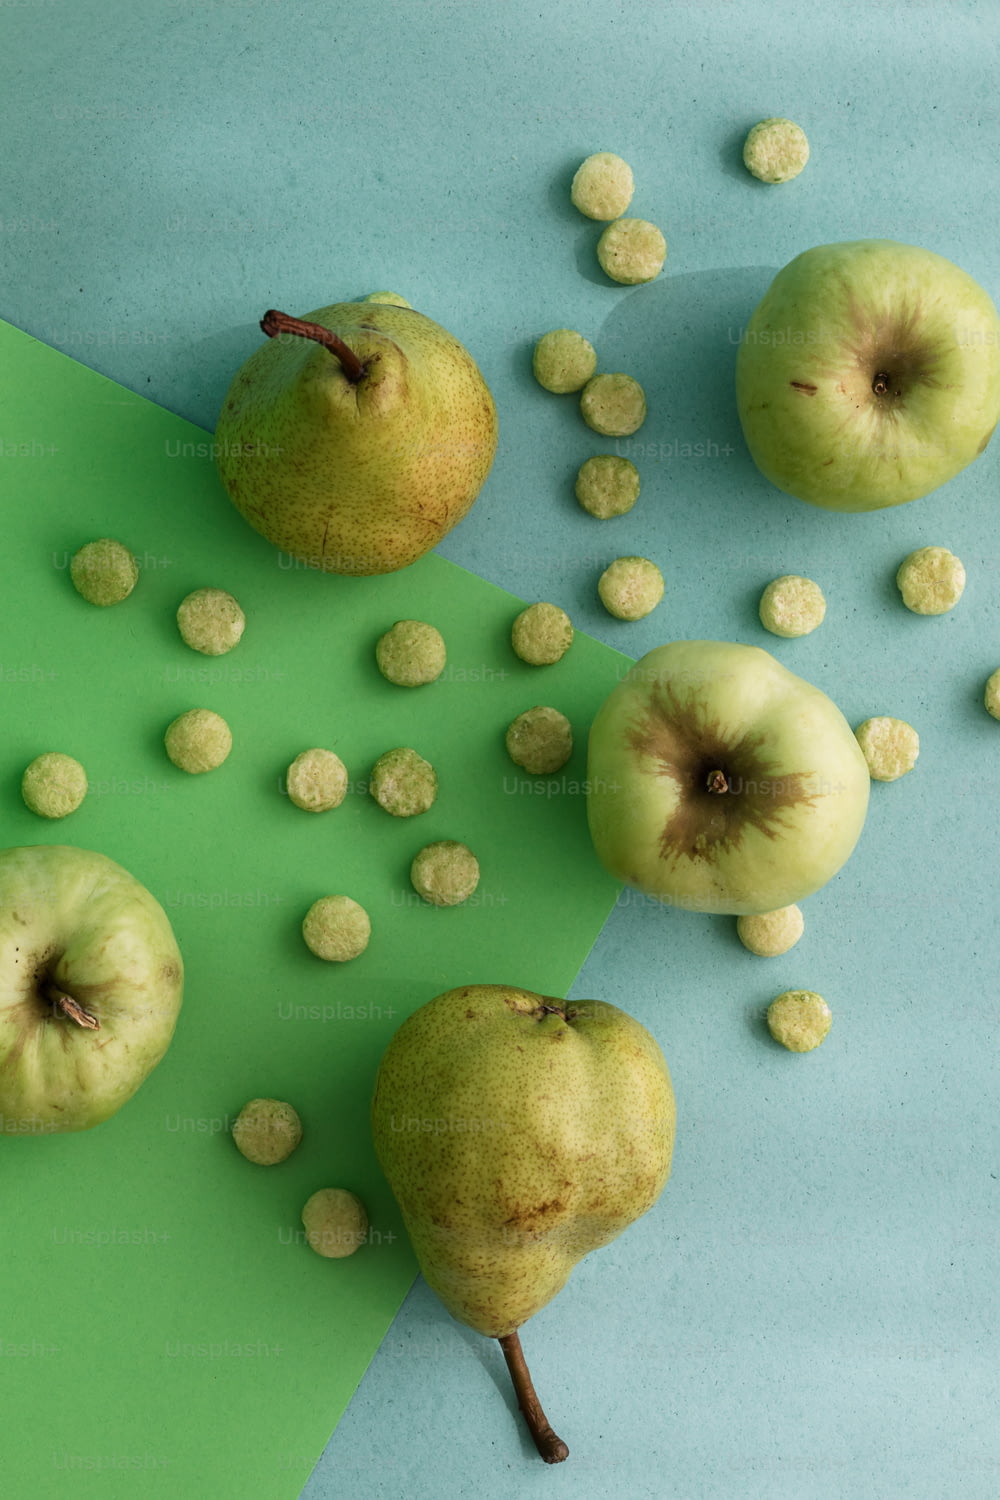 a group of apples sitting on top of a green and blue surface